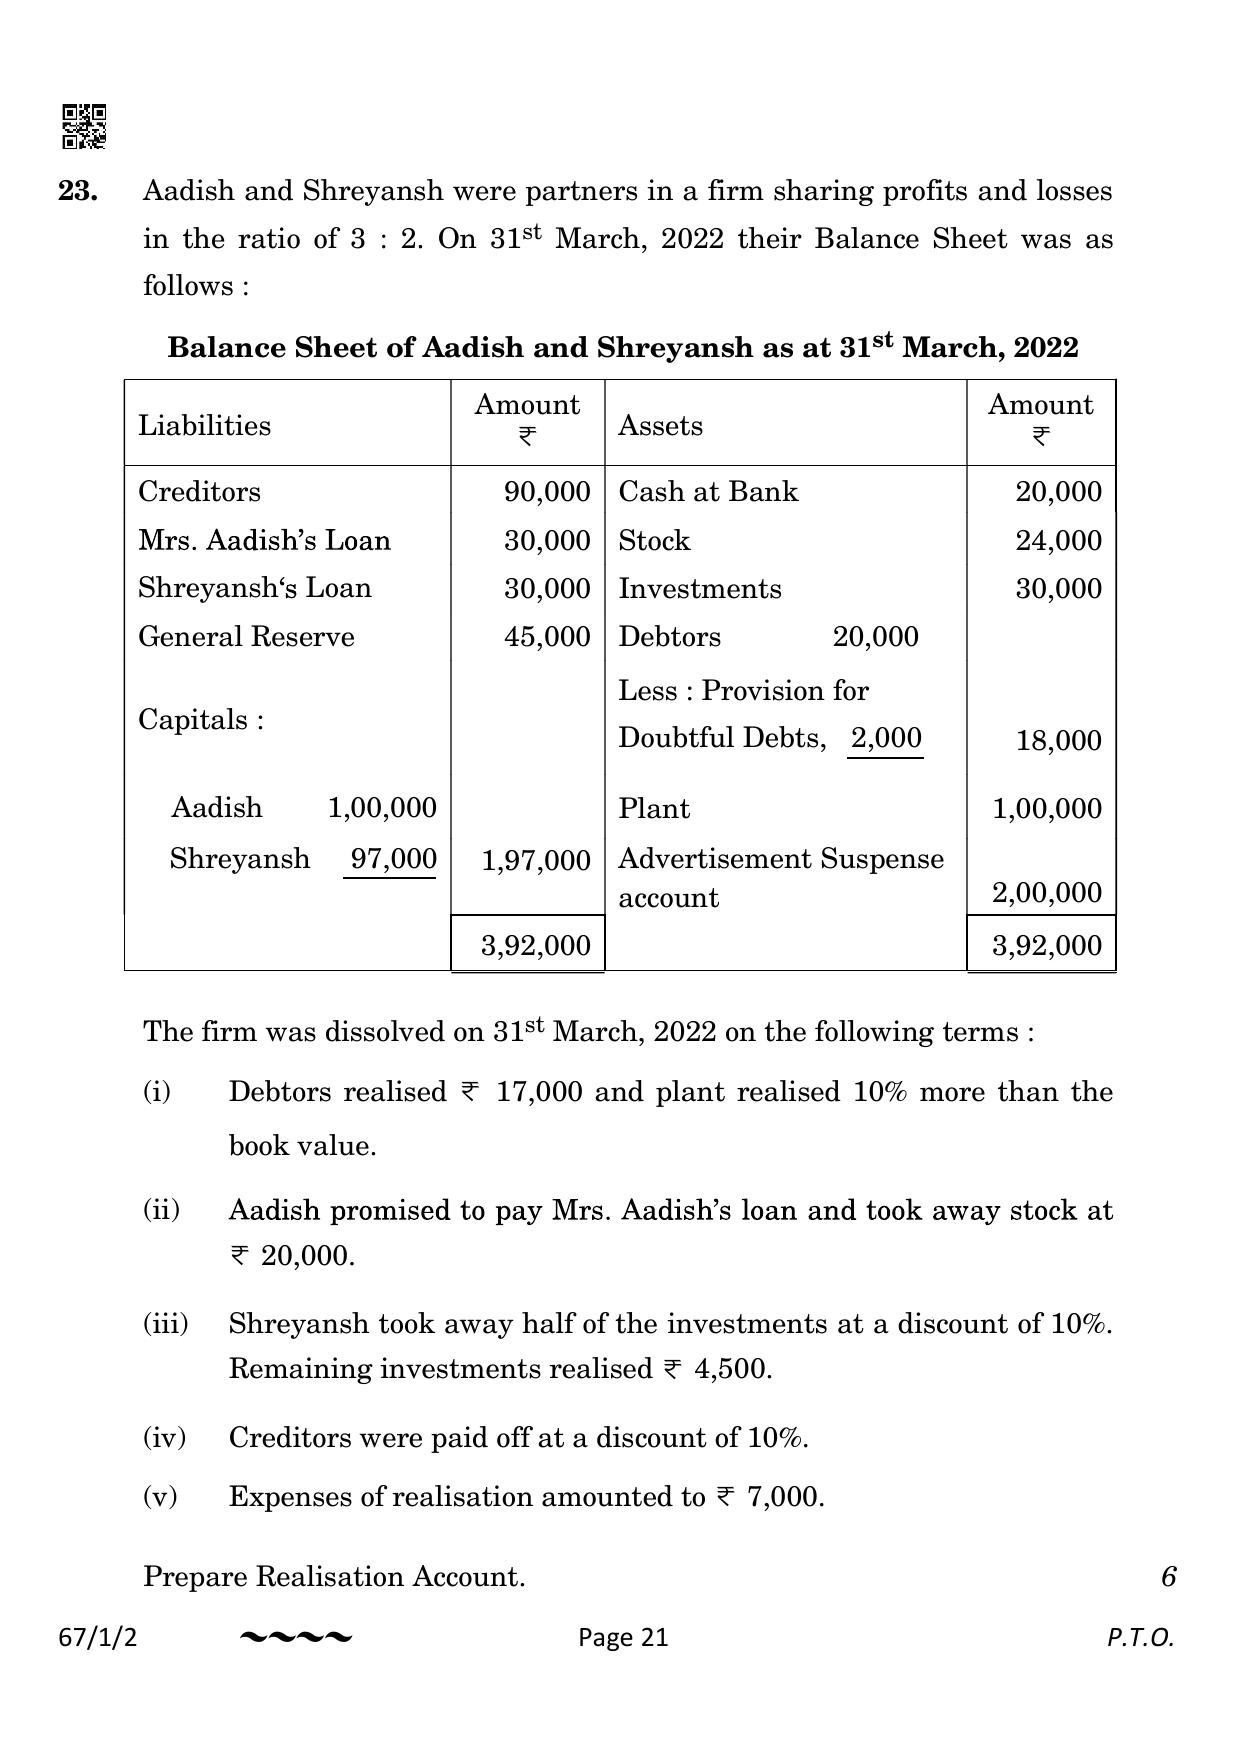 CBSE Class 12 67-1-2 Accountancy 2023 Question Paper - Page 21